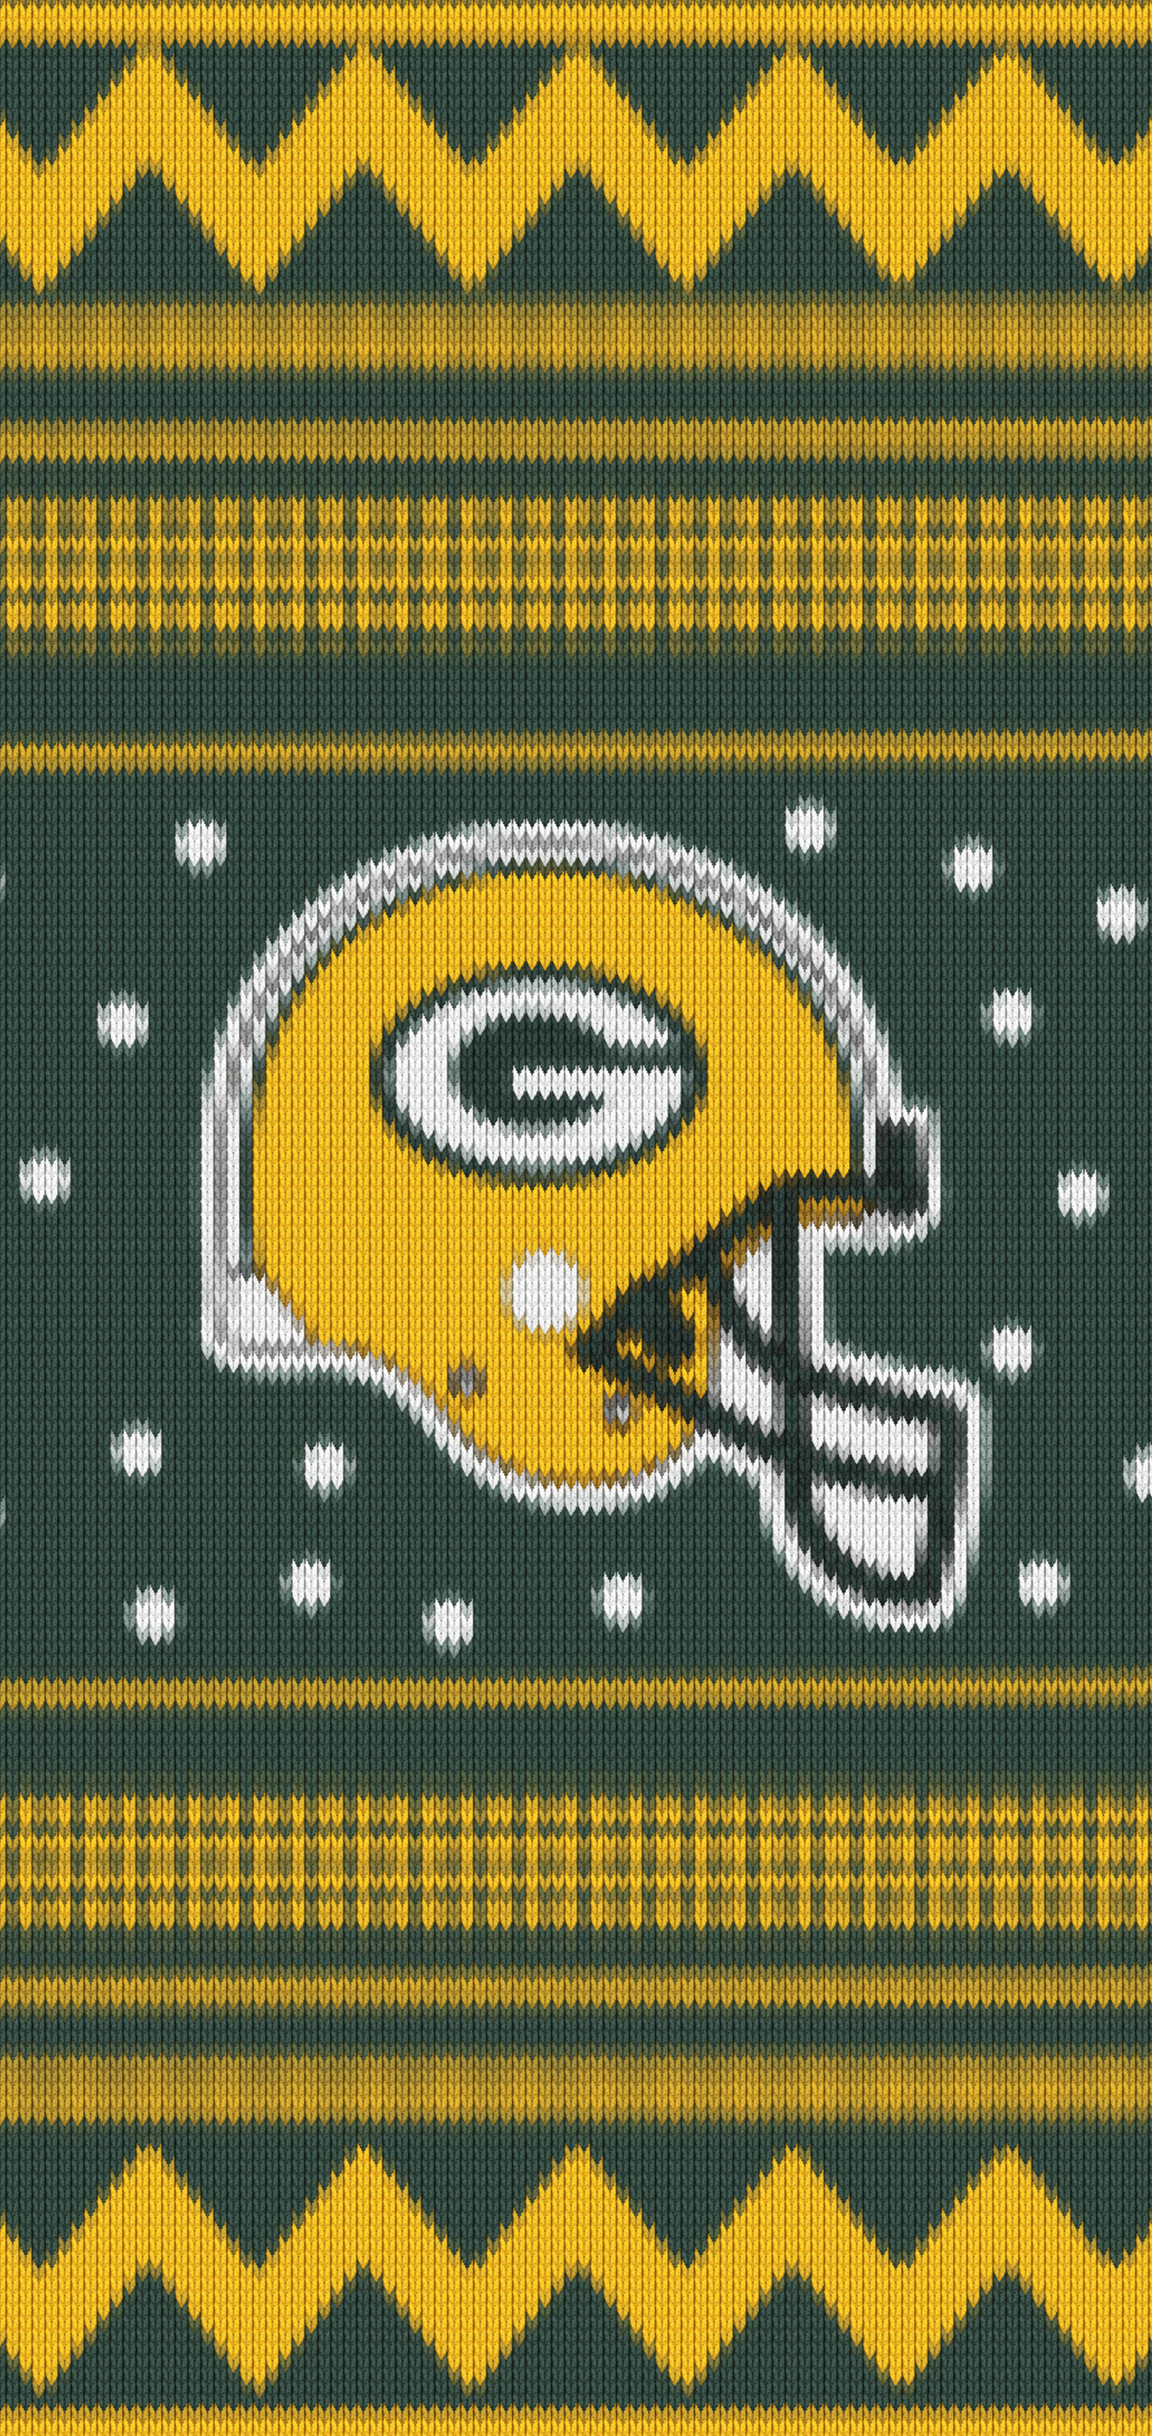 Green Bay Packers Wallpaper Iphone